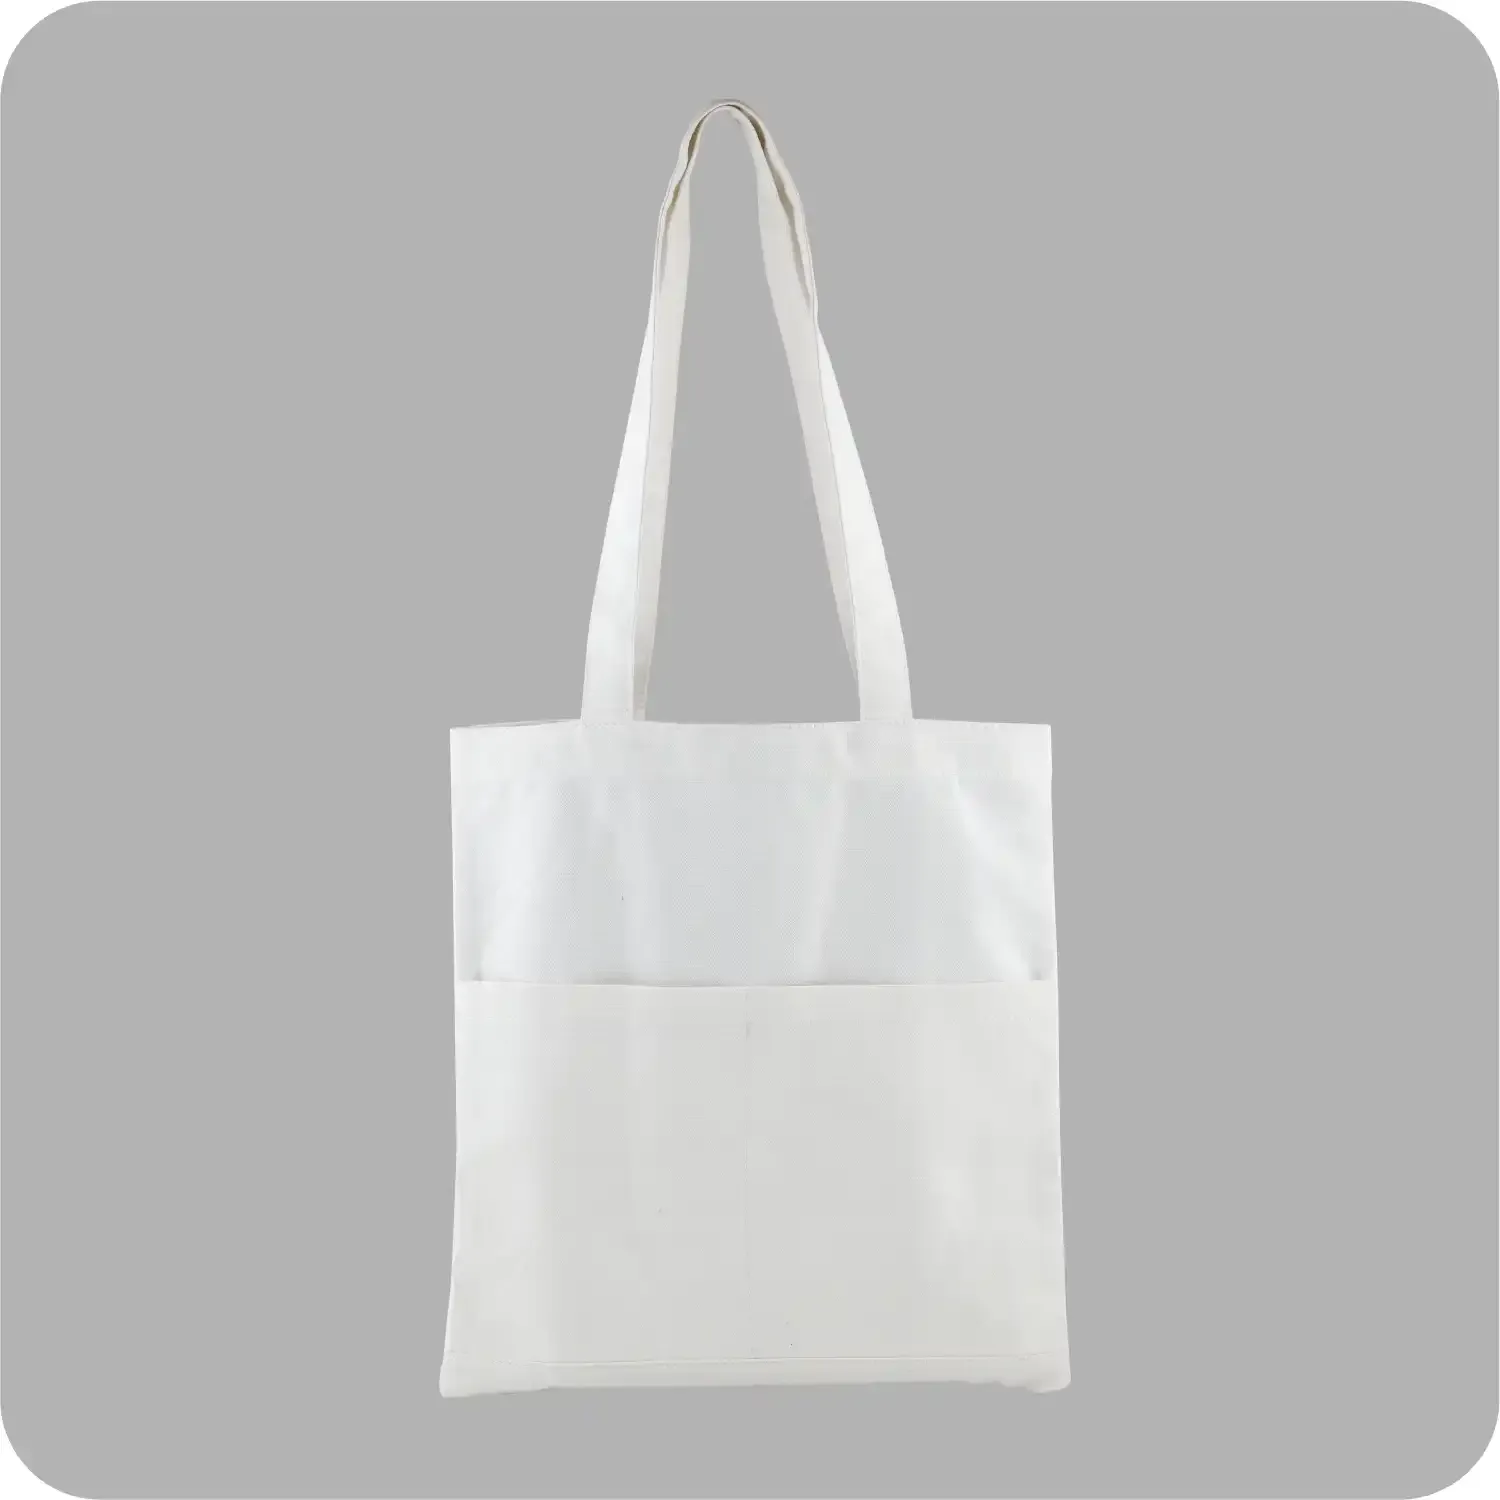 Sturdy, Lightweight, Environmental Friendly, Double Pocketed, Cotton Bags